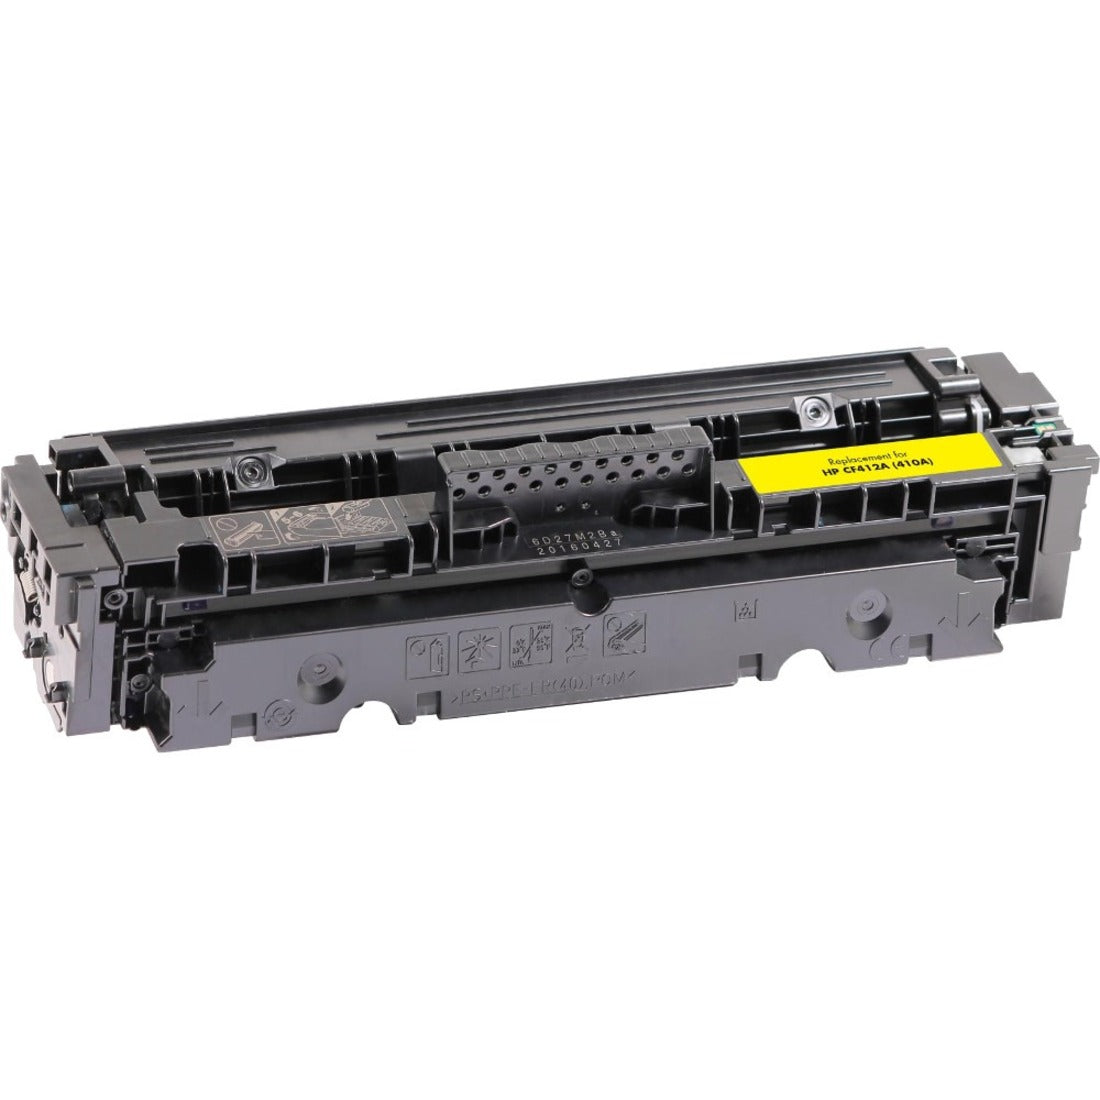 Clover Technologies 200948P Toner Cartridge, Yellow, 2300 Pages